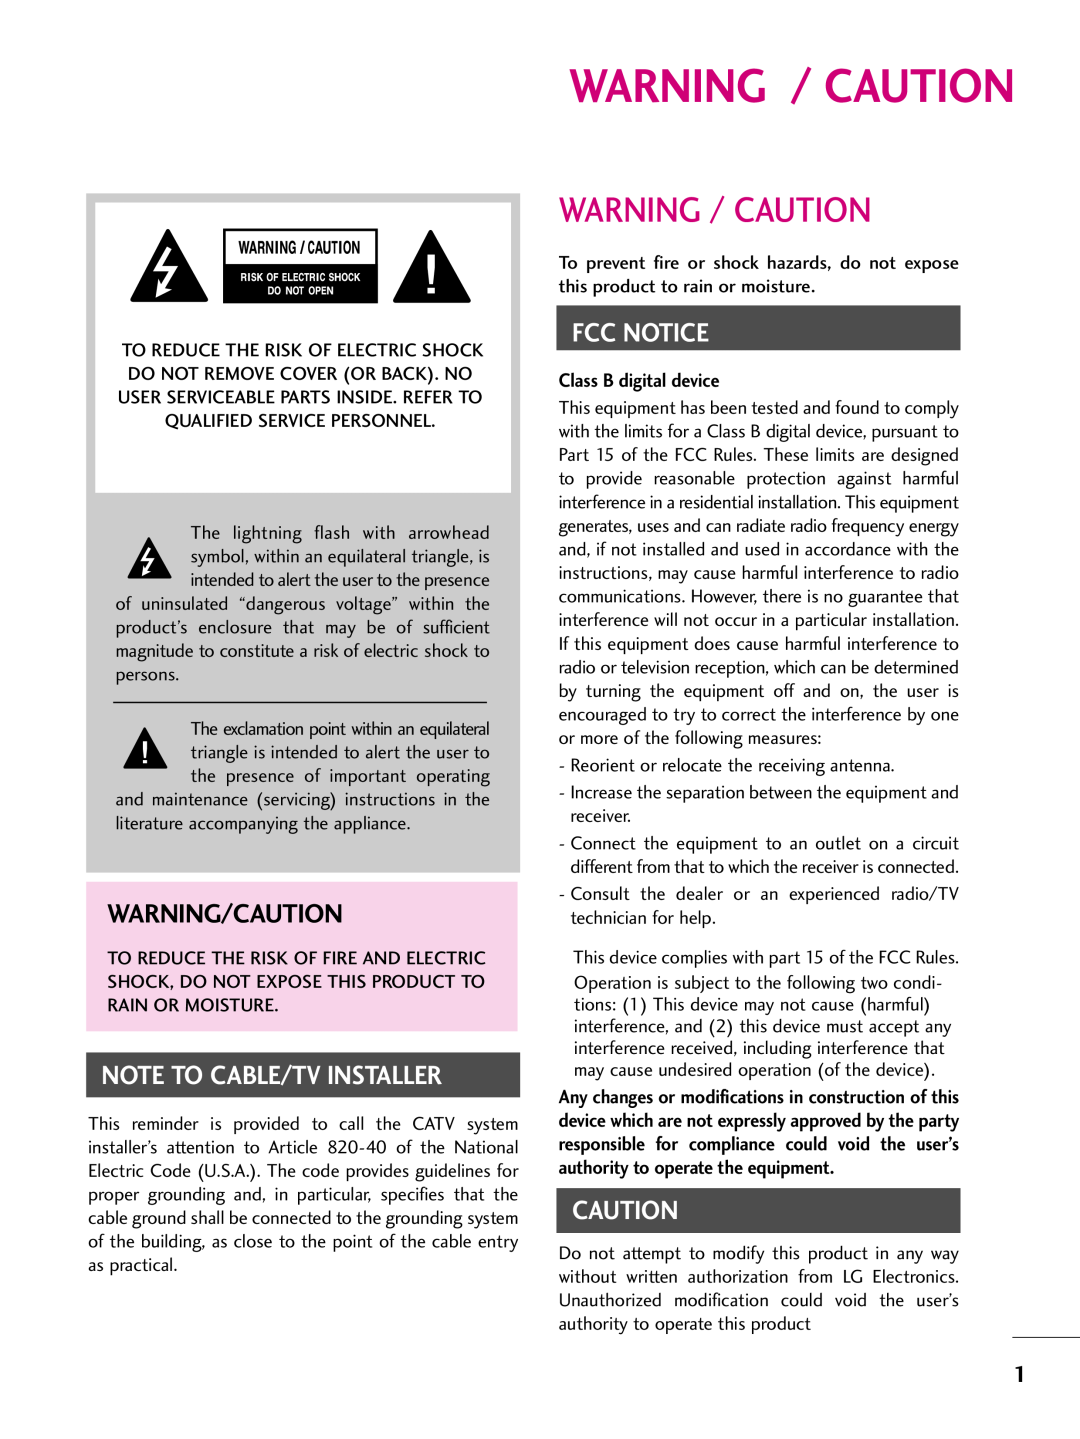 LG Electronics 37LH250H Warning / Caution, Warning/Caution, Note To Cable/Tv Installer, Fcc Notice, Class B digital device 